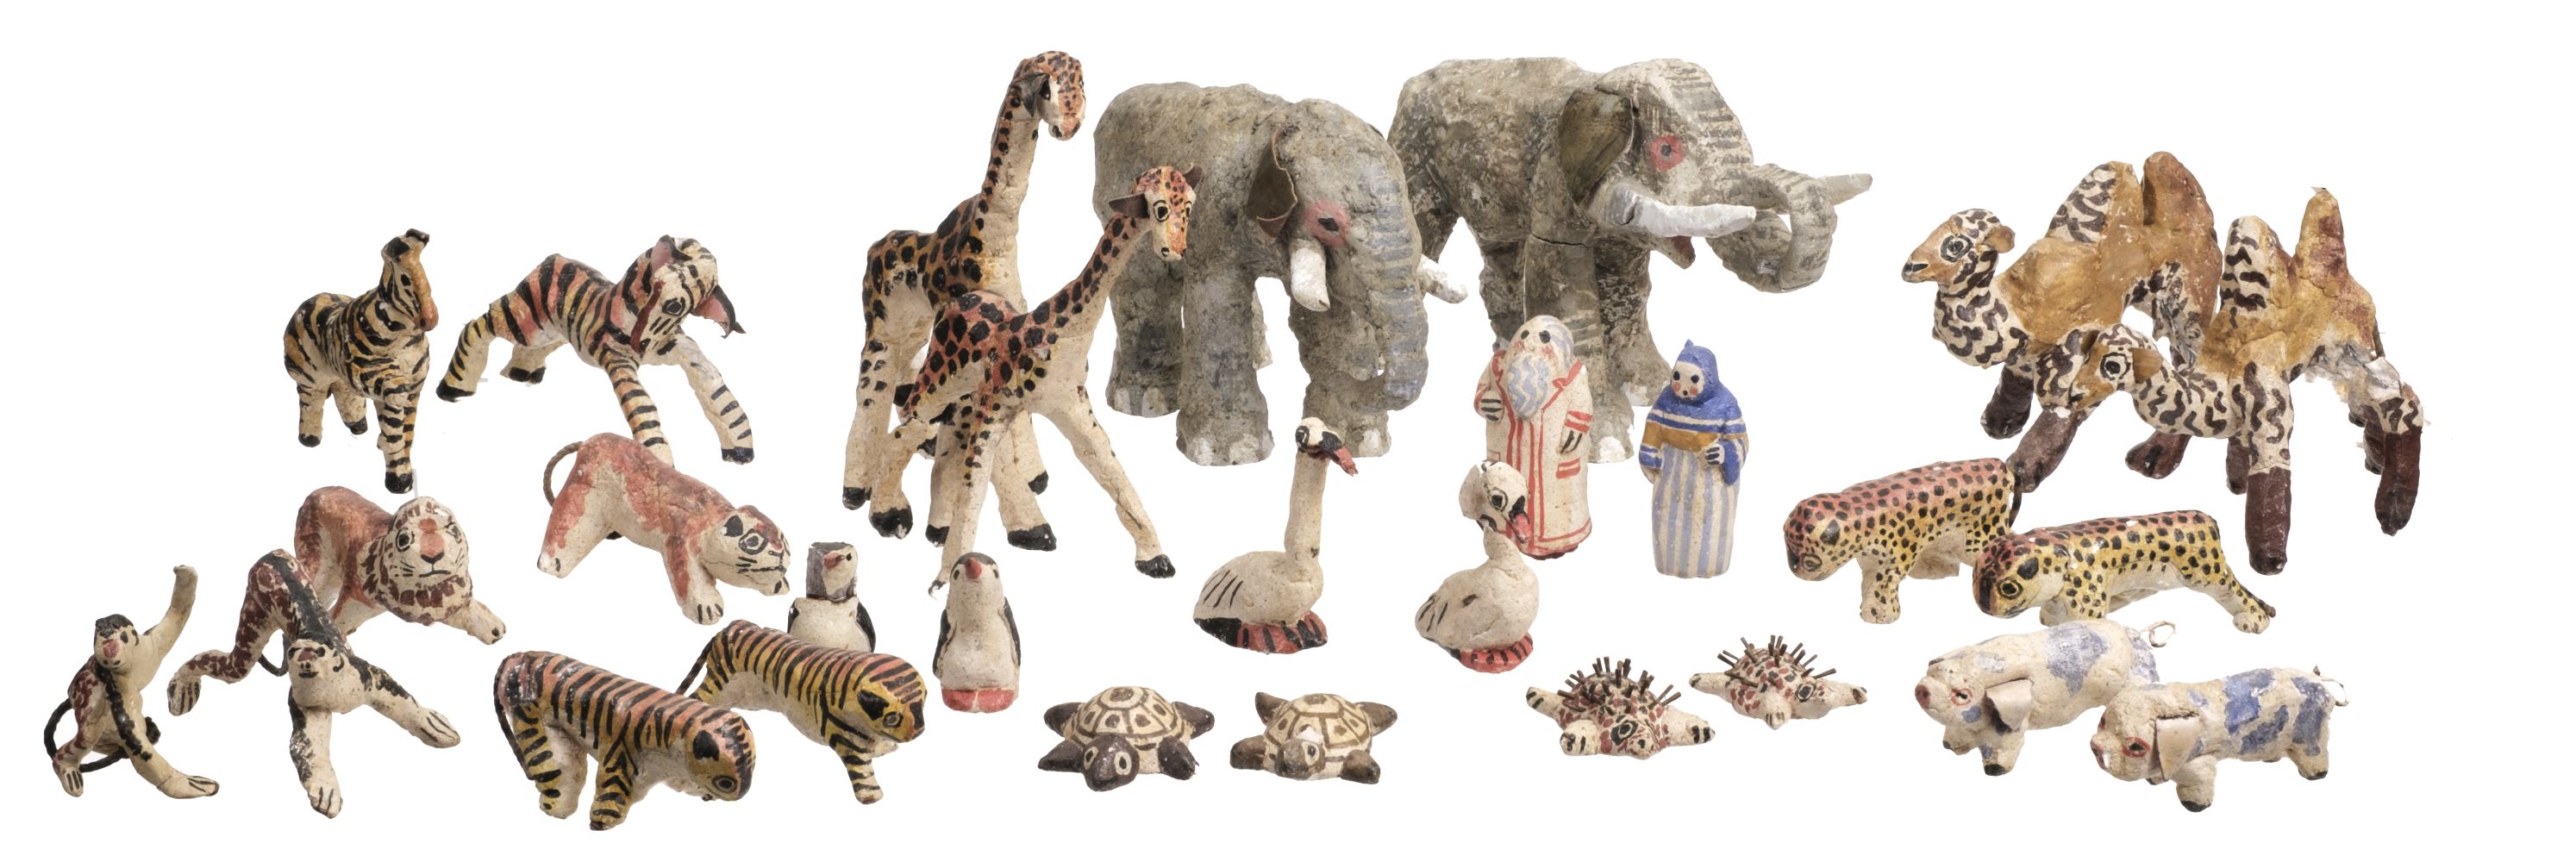 Ellis (Clifford Wilson, 1907-1985 & Rosemary, 1910-1998). A collection of Noah's Ark figurines